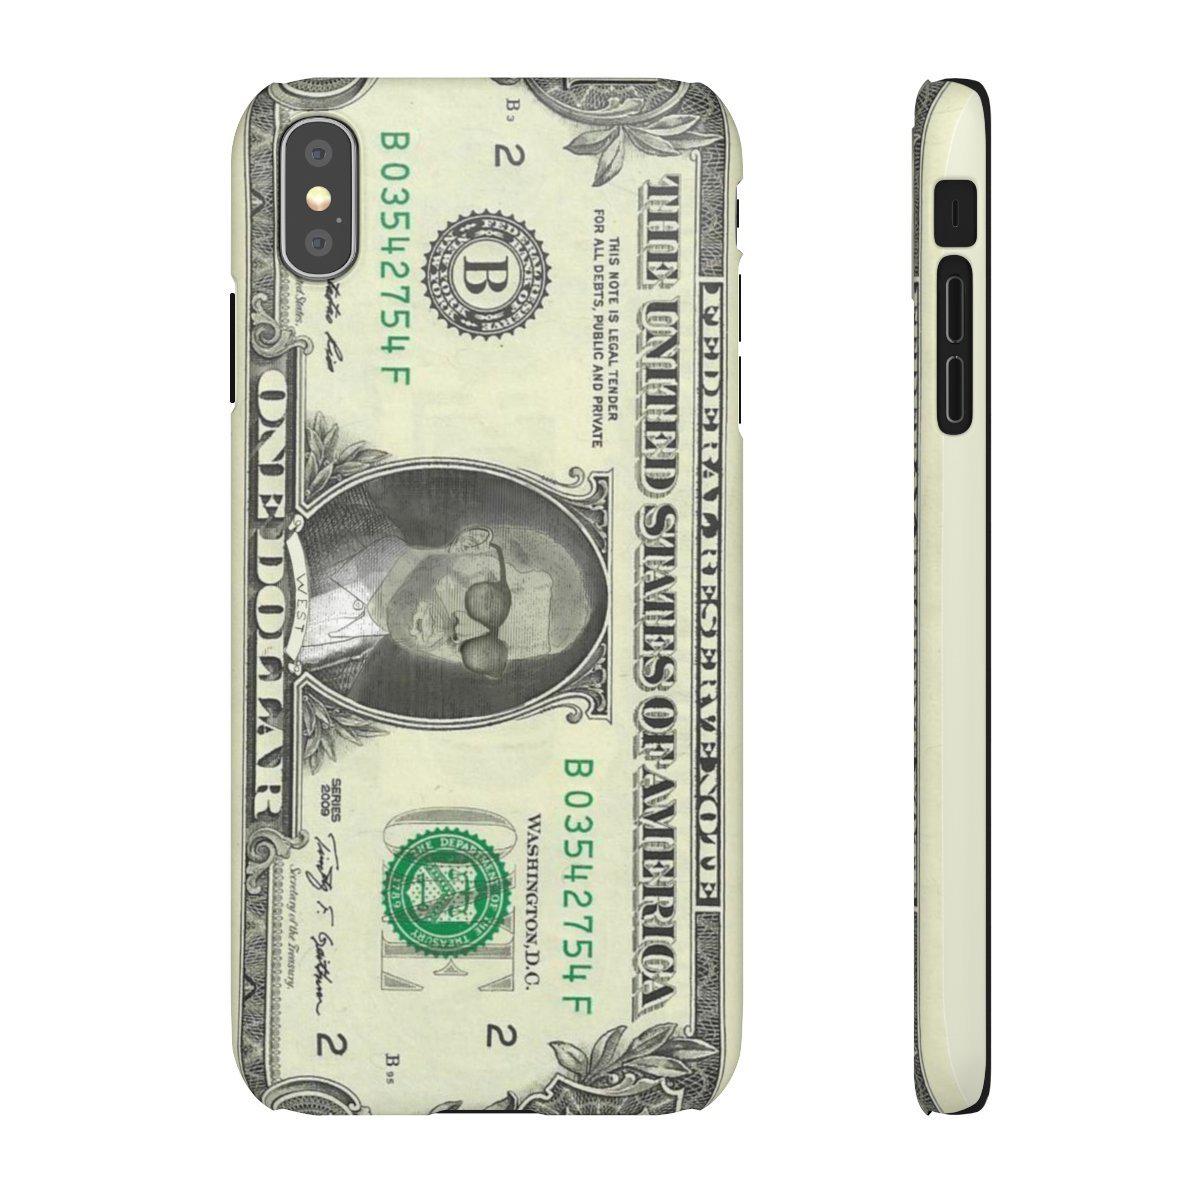 Kanye West President face on 1 dollar bill case iPhone Snap Case-iPhone XS MAX-Matte-Archethype